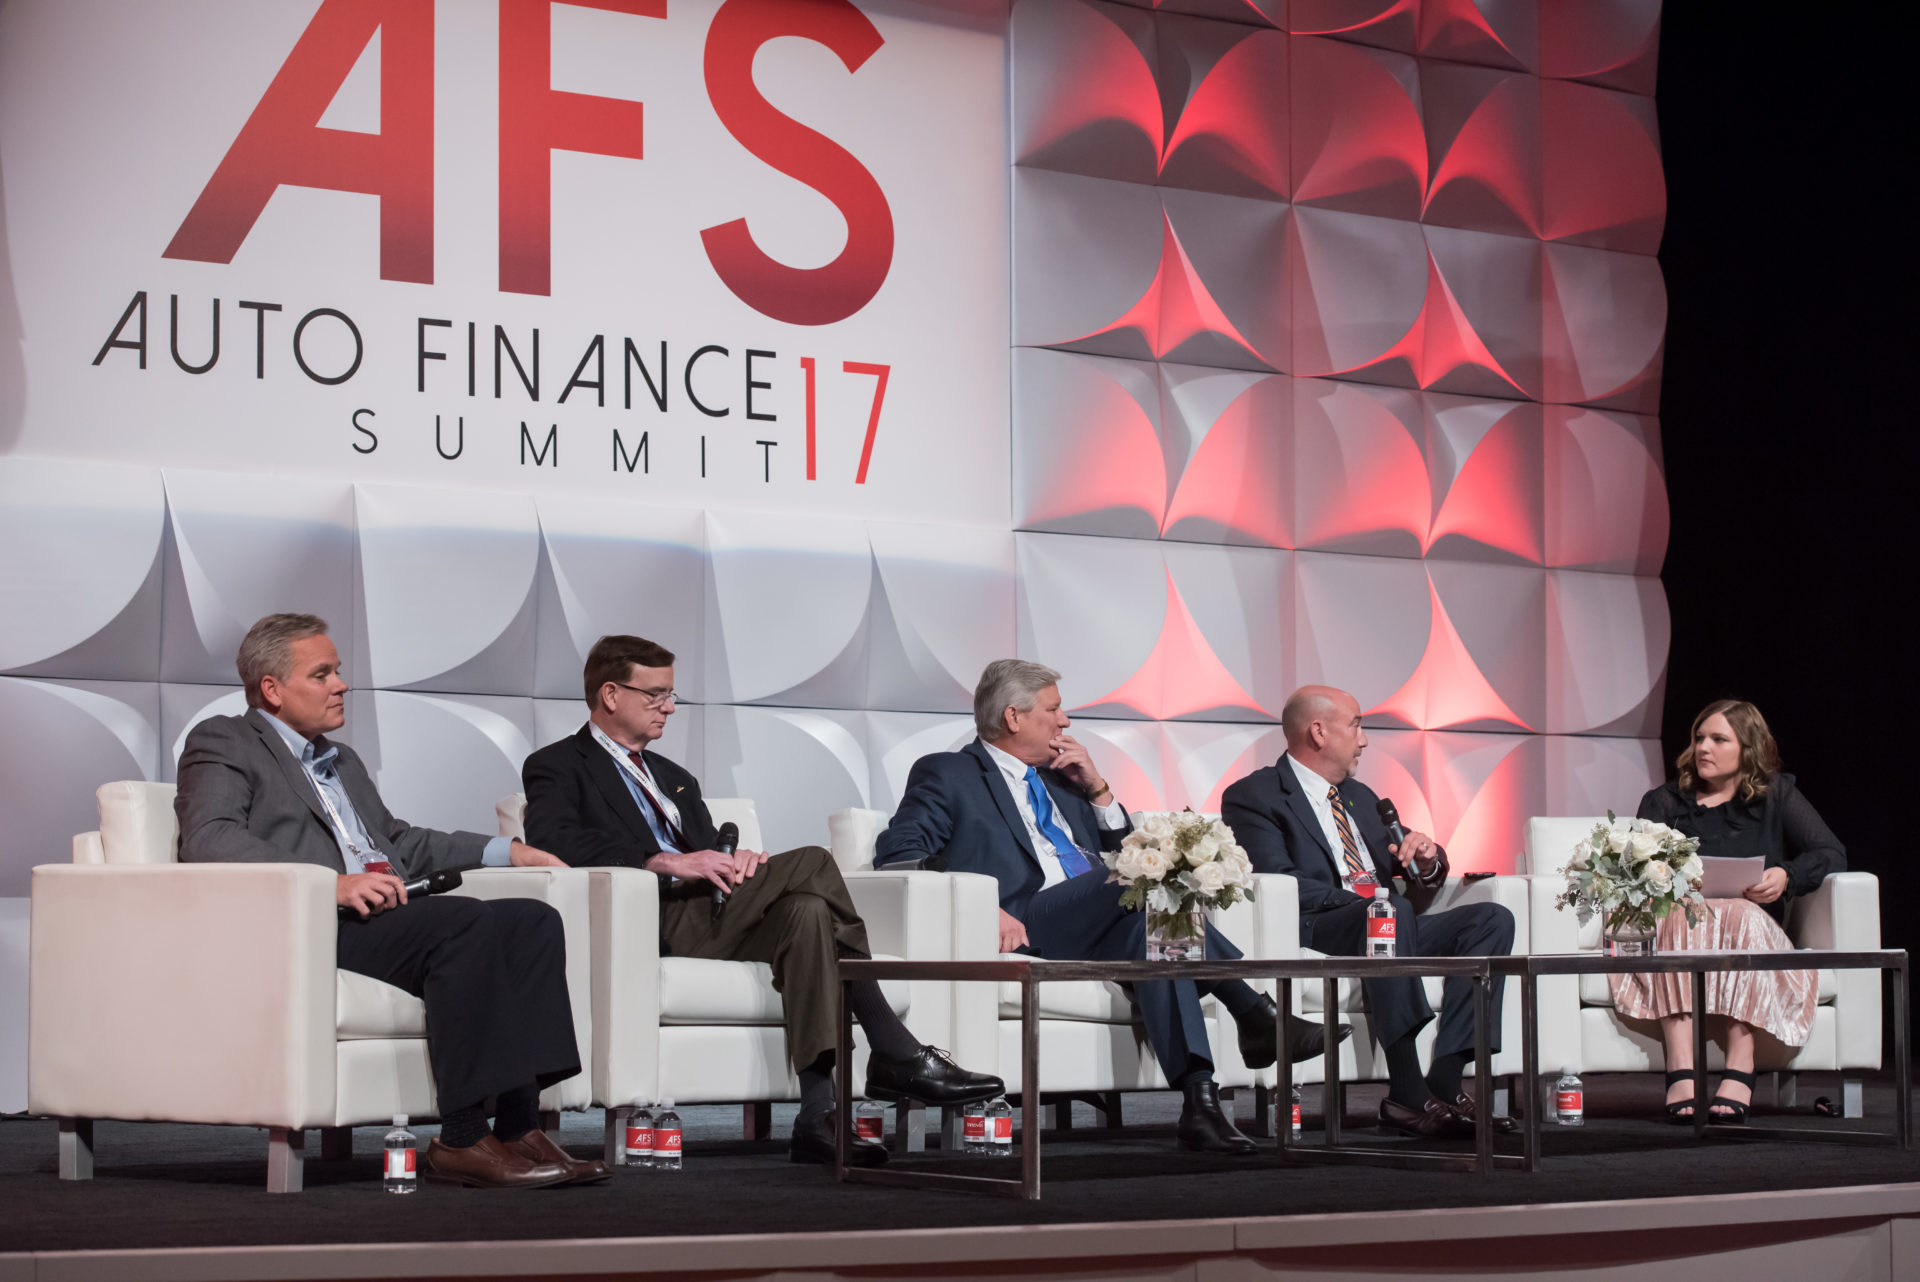 Auto finance executivs discuss practical strategies in a post-peak market at the 2017 Auto Finance Summit late October.